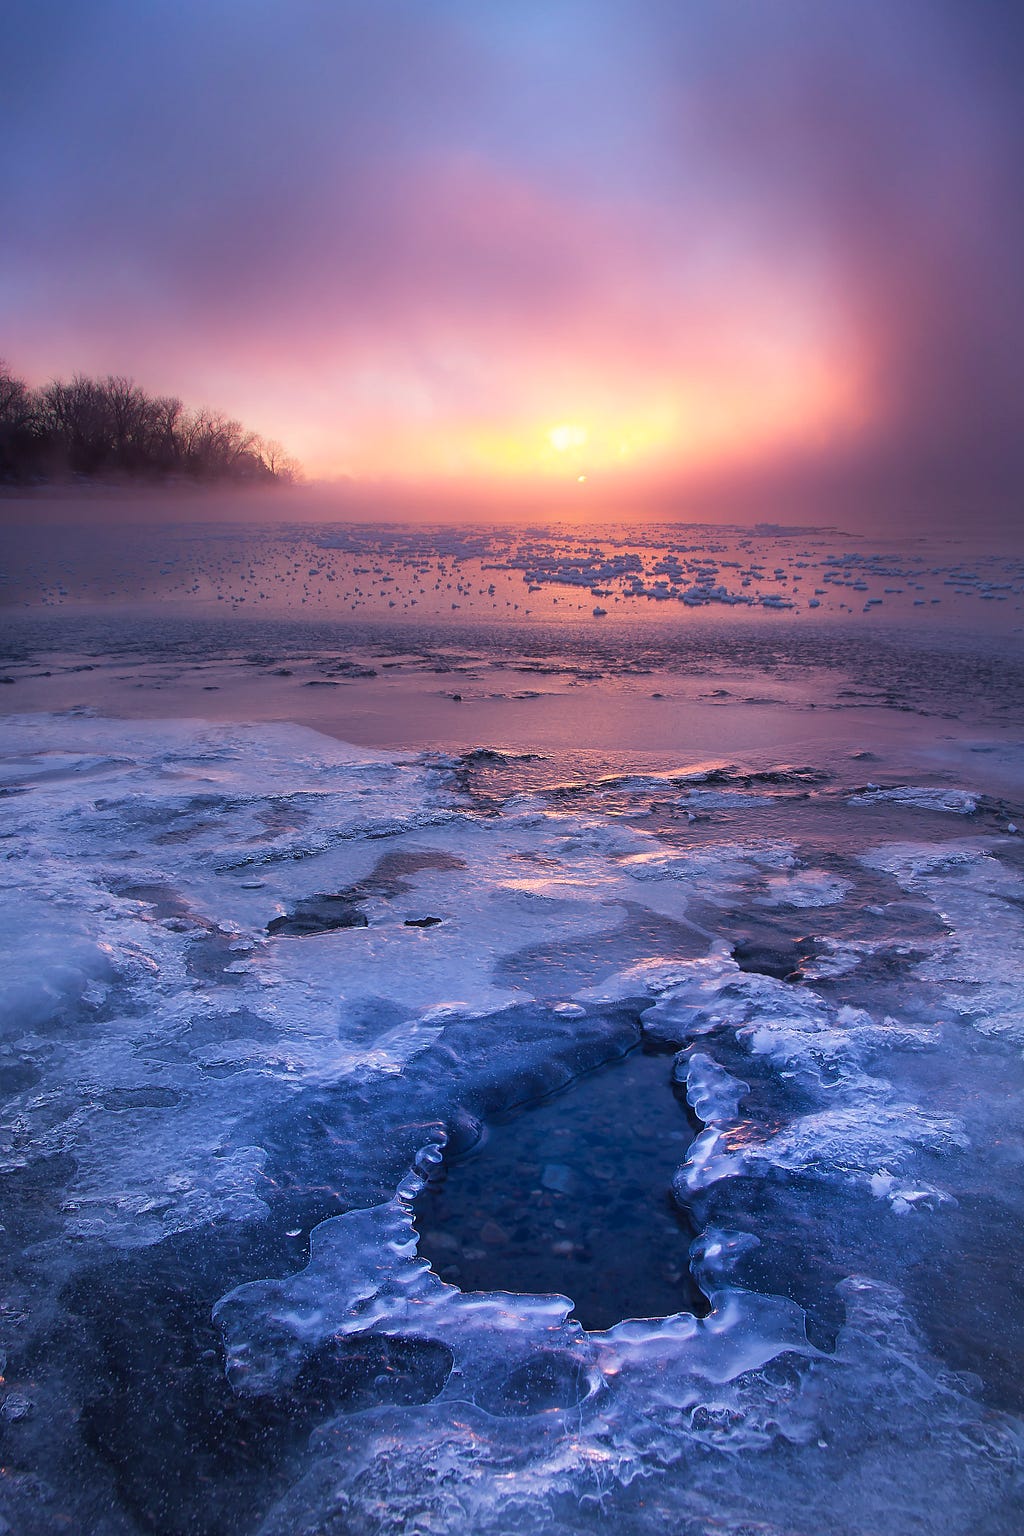 Sun rises through a pink and purple fog, reflected in the ice and water of a river.